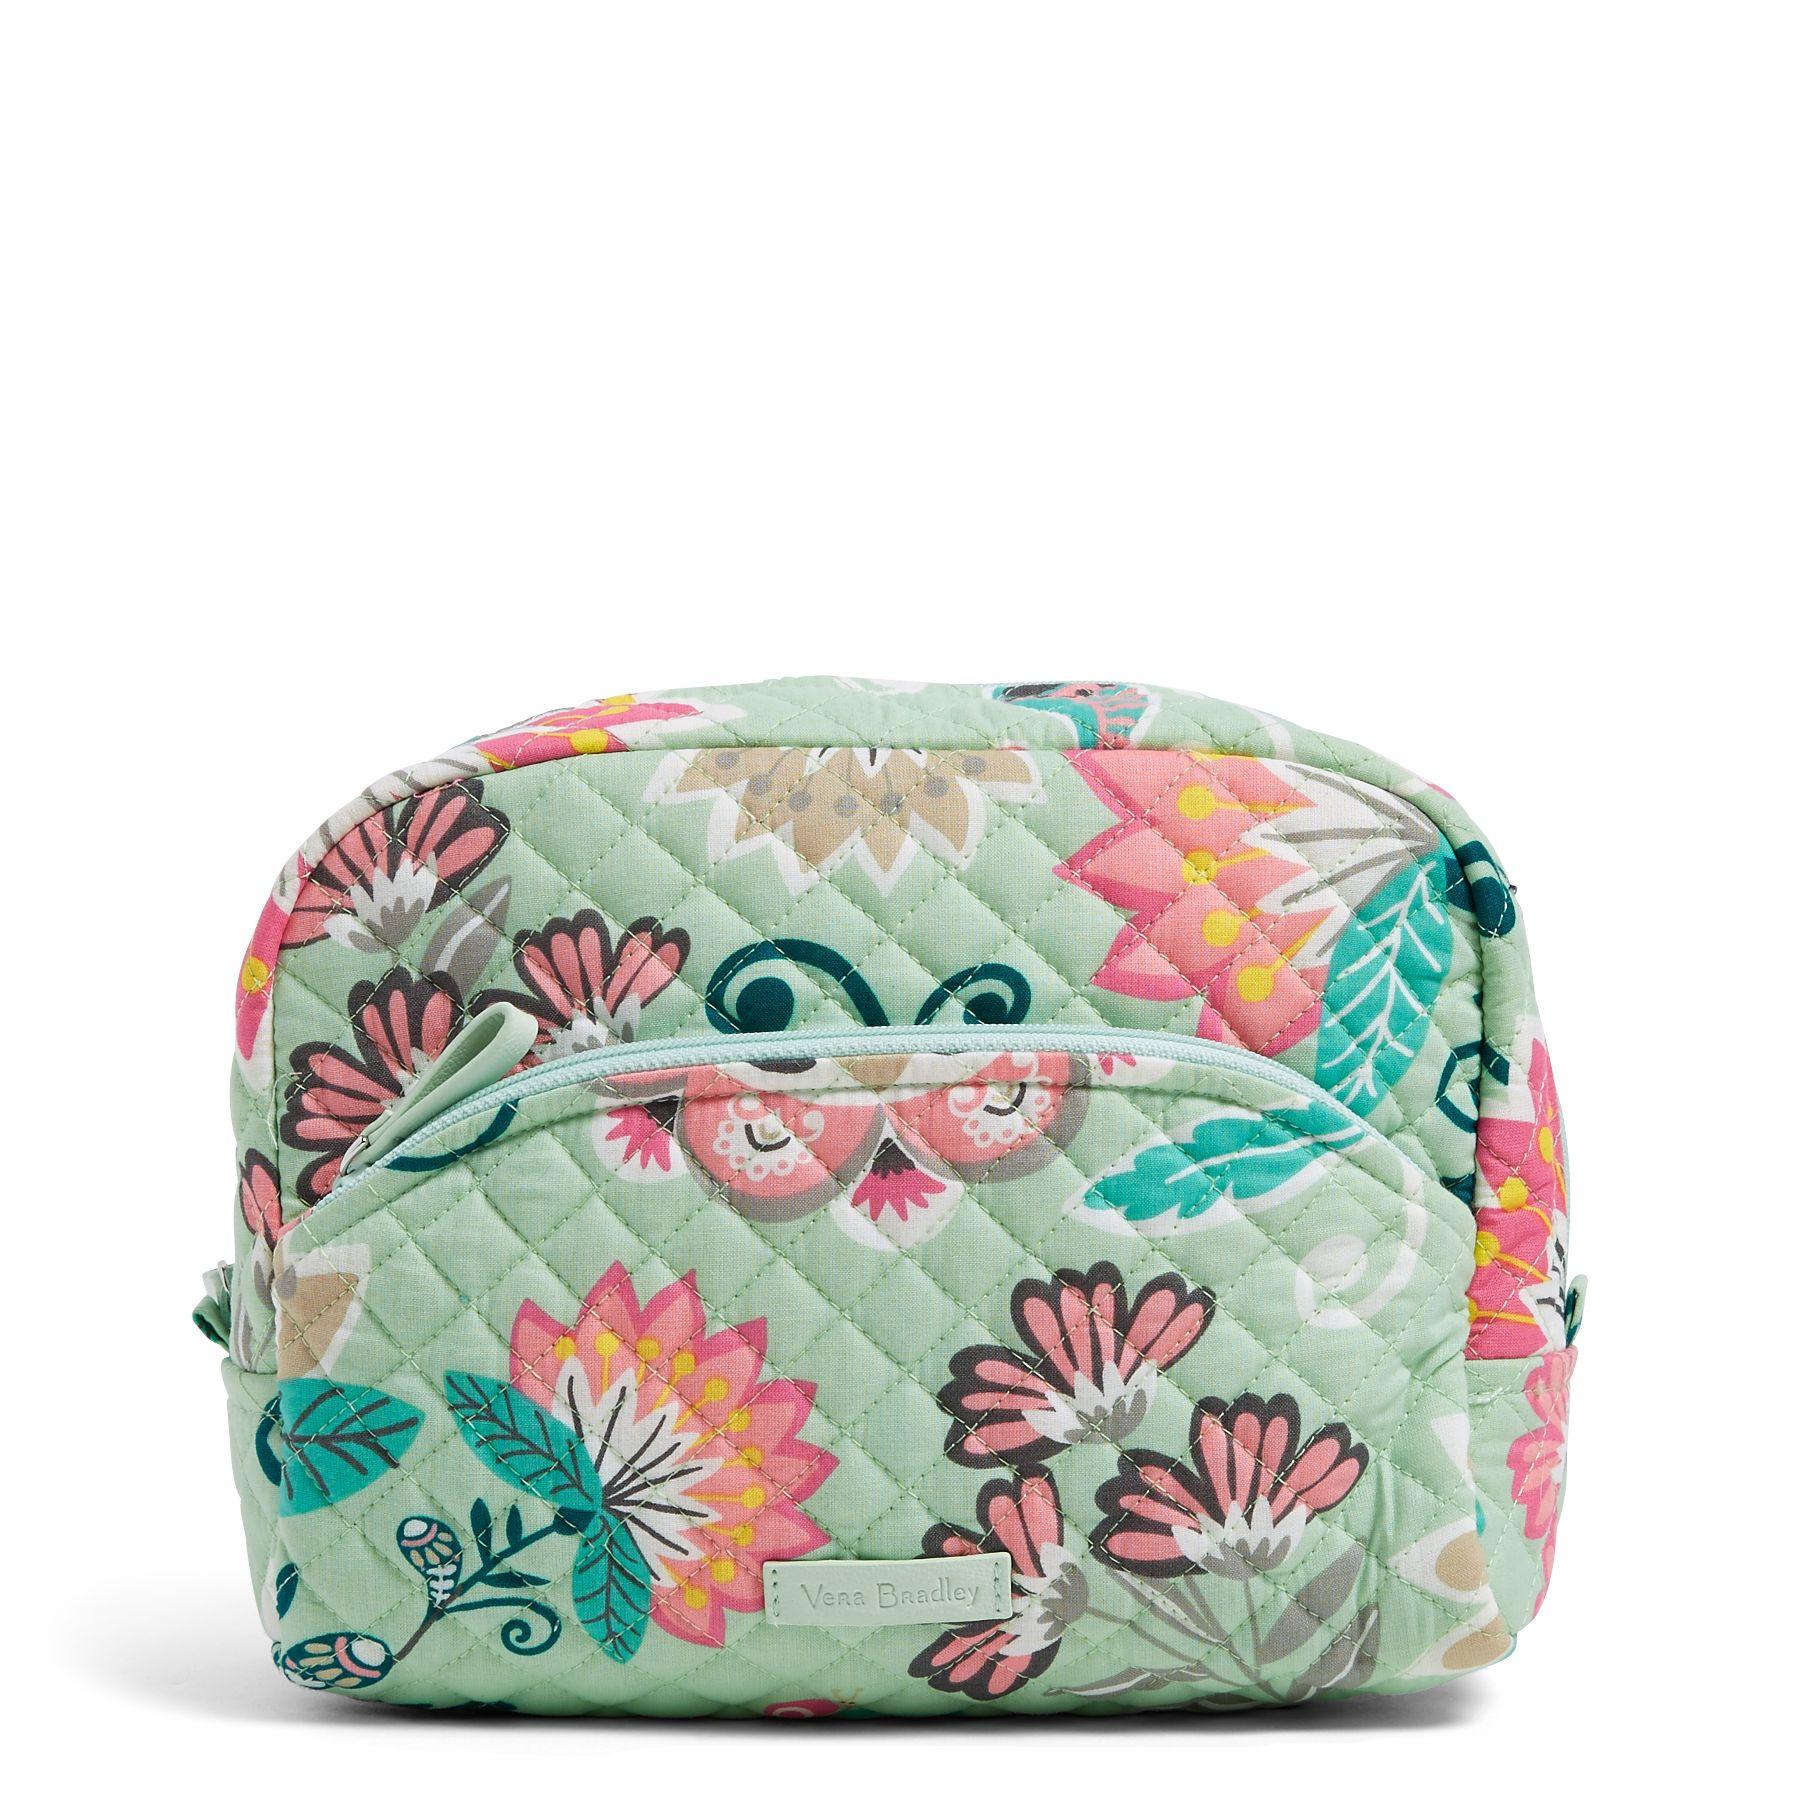 Vera Bradley Iconic Large Cosmetic Bag in Green - Save 3% - Lyst